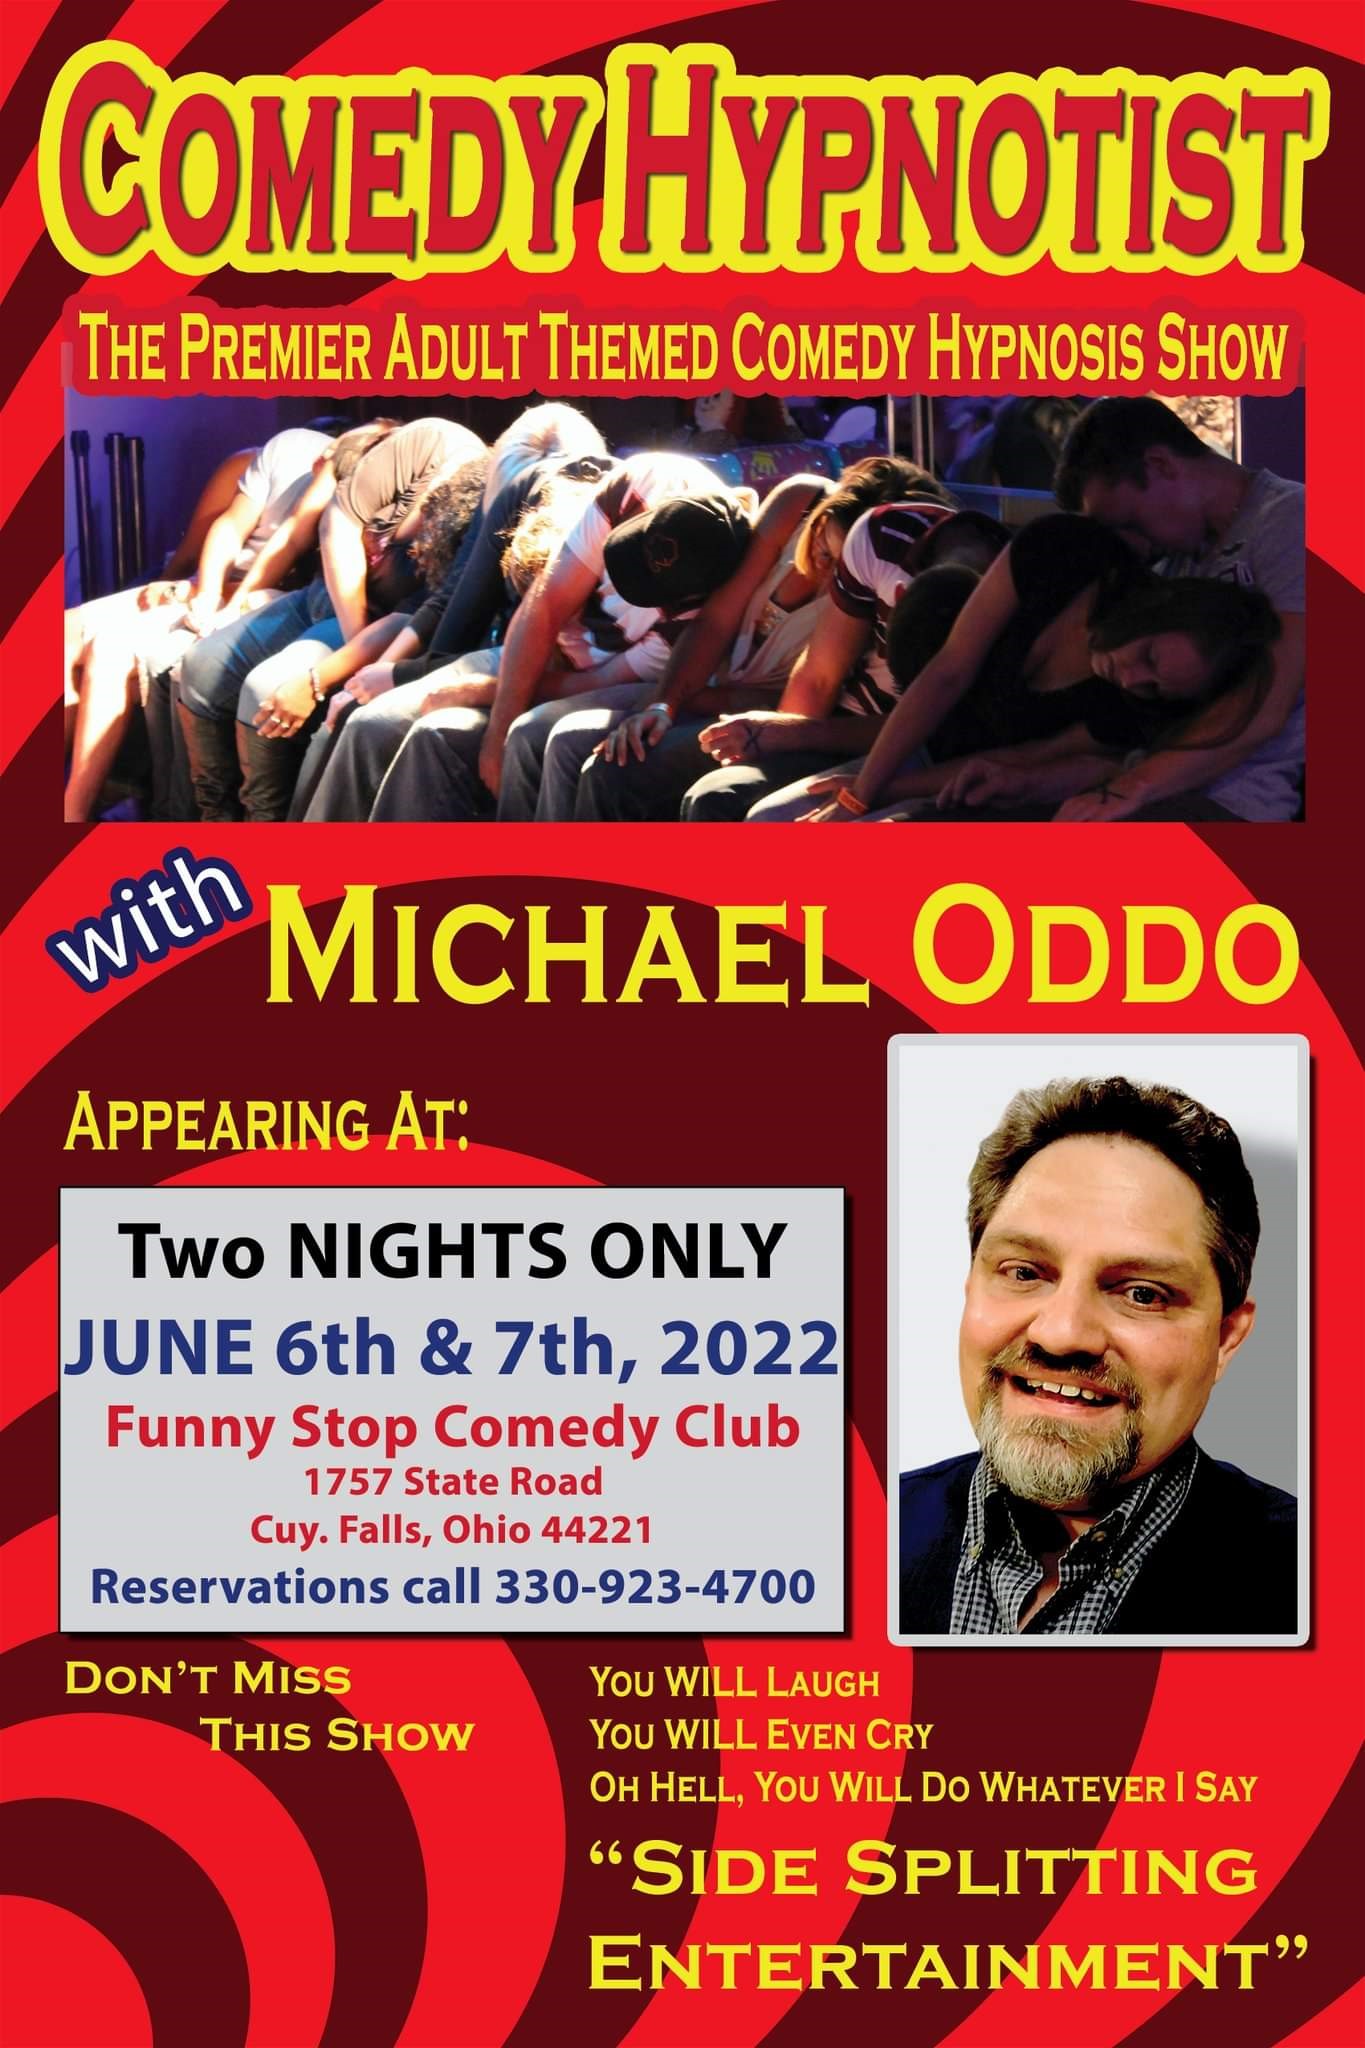 Michael Oddo 8 PM Show Funny Stop Comedy Club on jun. 07, 20:00@Funny Stop Comedy Club - Buy tickets and Get information on Funny Stop funnystop.online